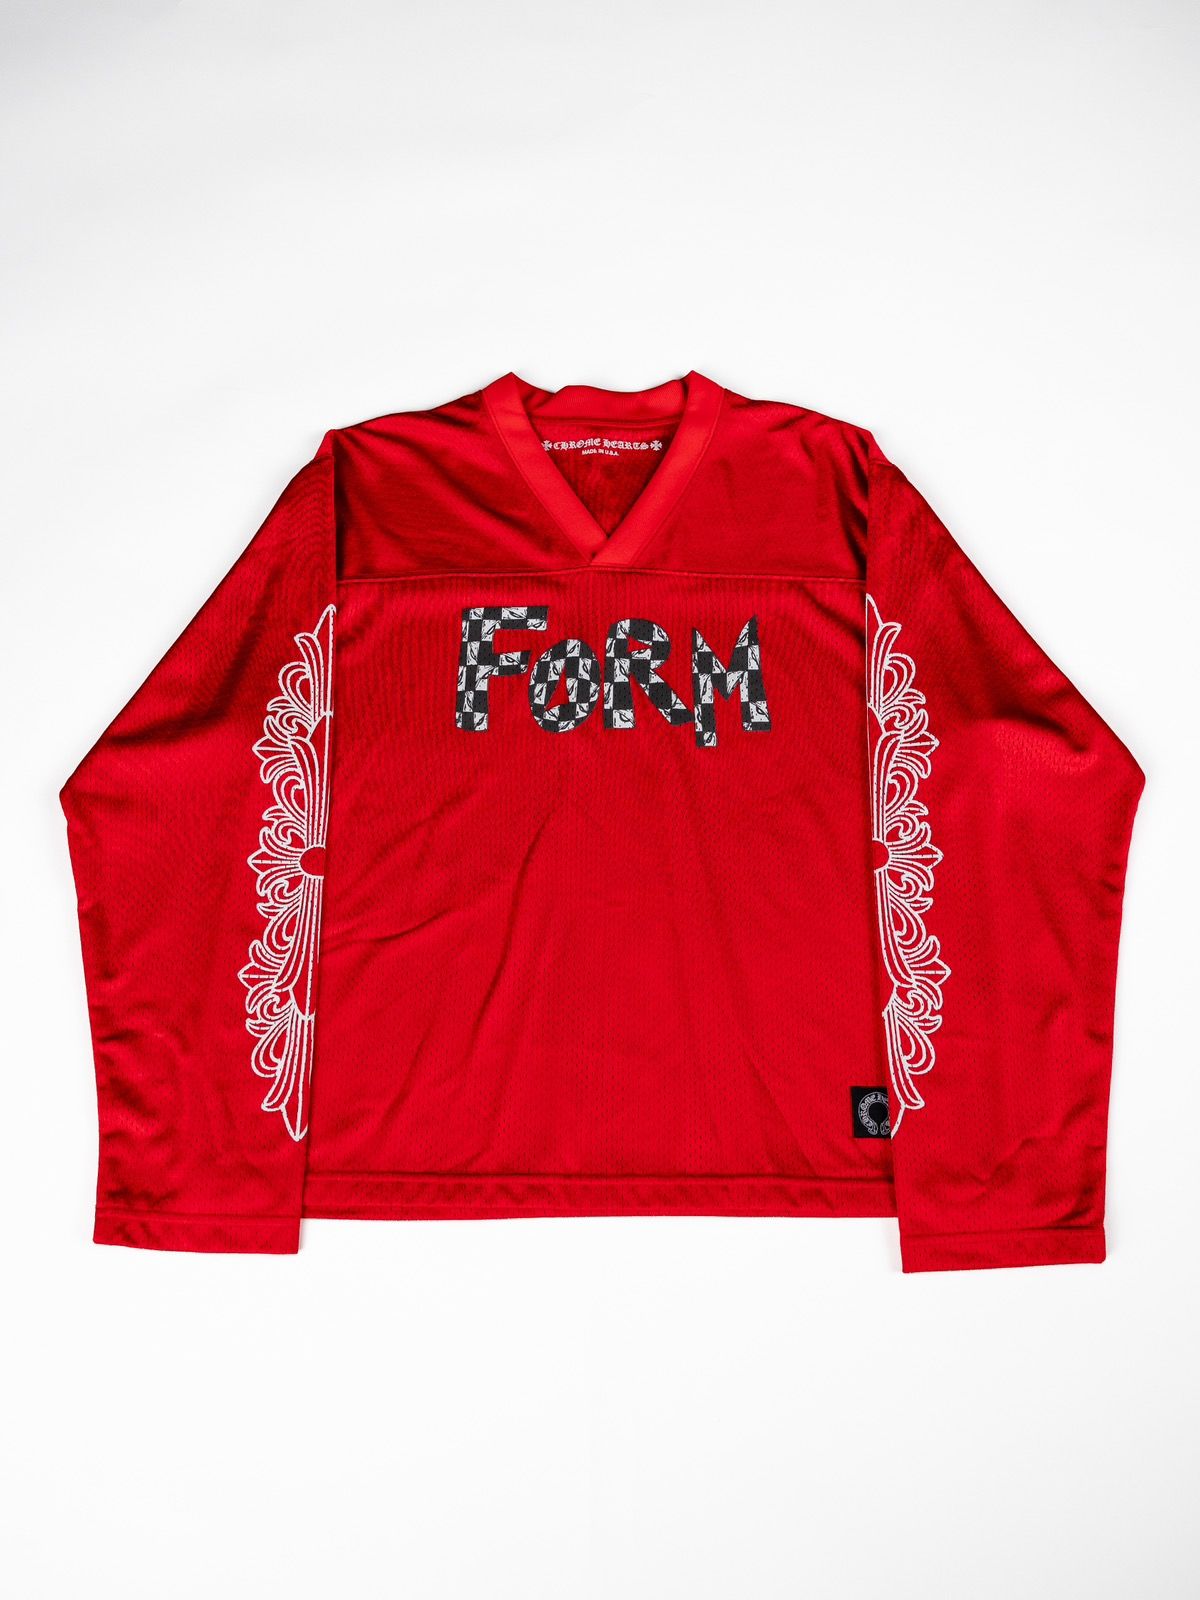 Pre-owned Chrome Hearts Matty Boy Form Mesh Long Sleeve Jersey In Red